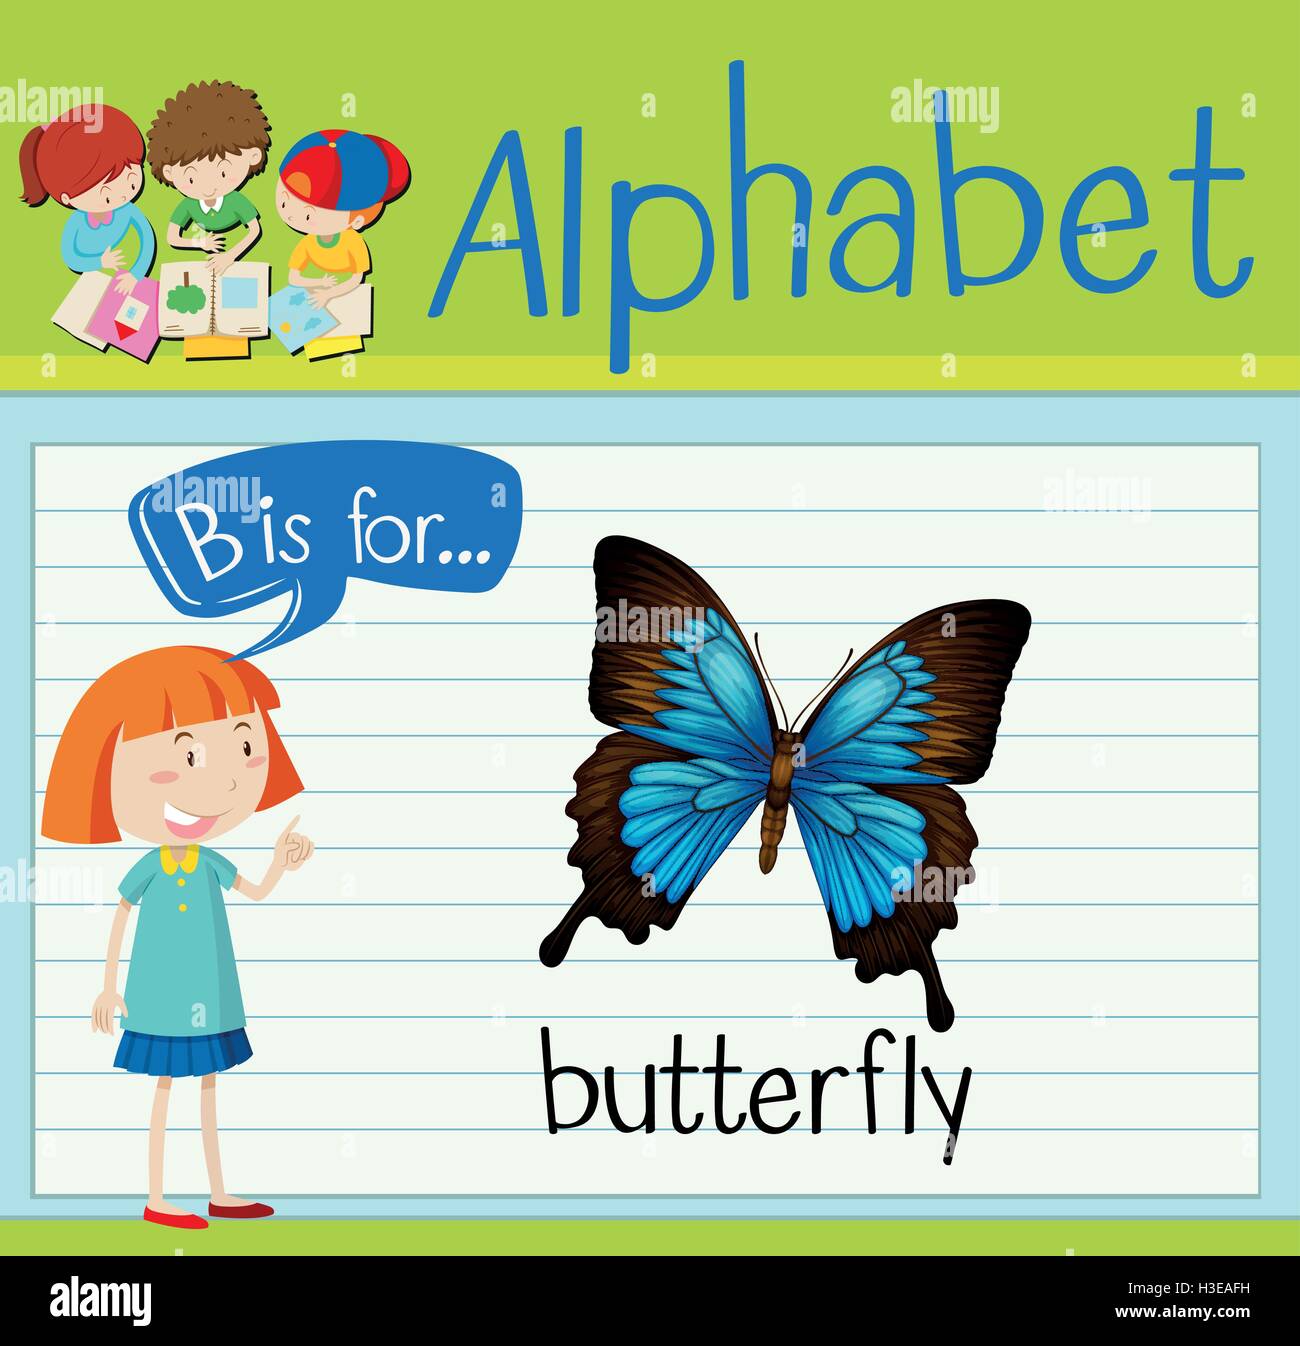 Flashcard letter B is for butterfly illustration Stock Vector